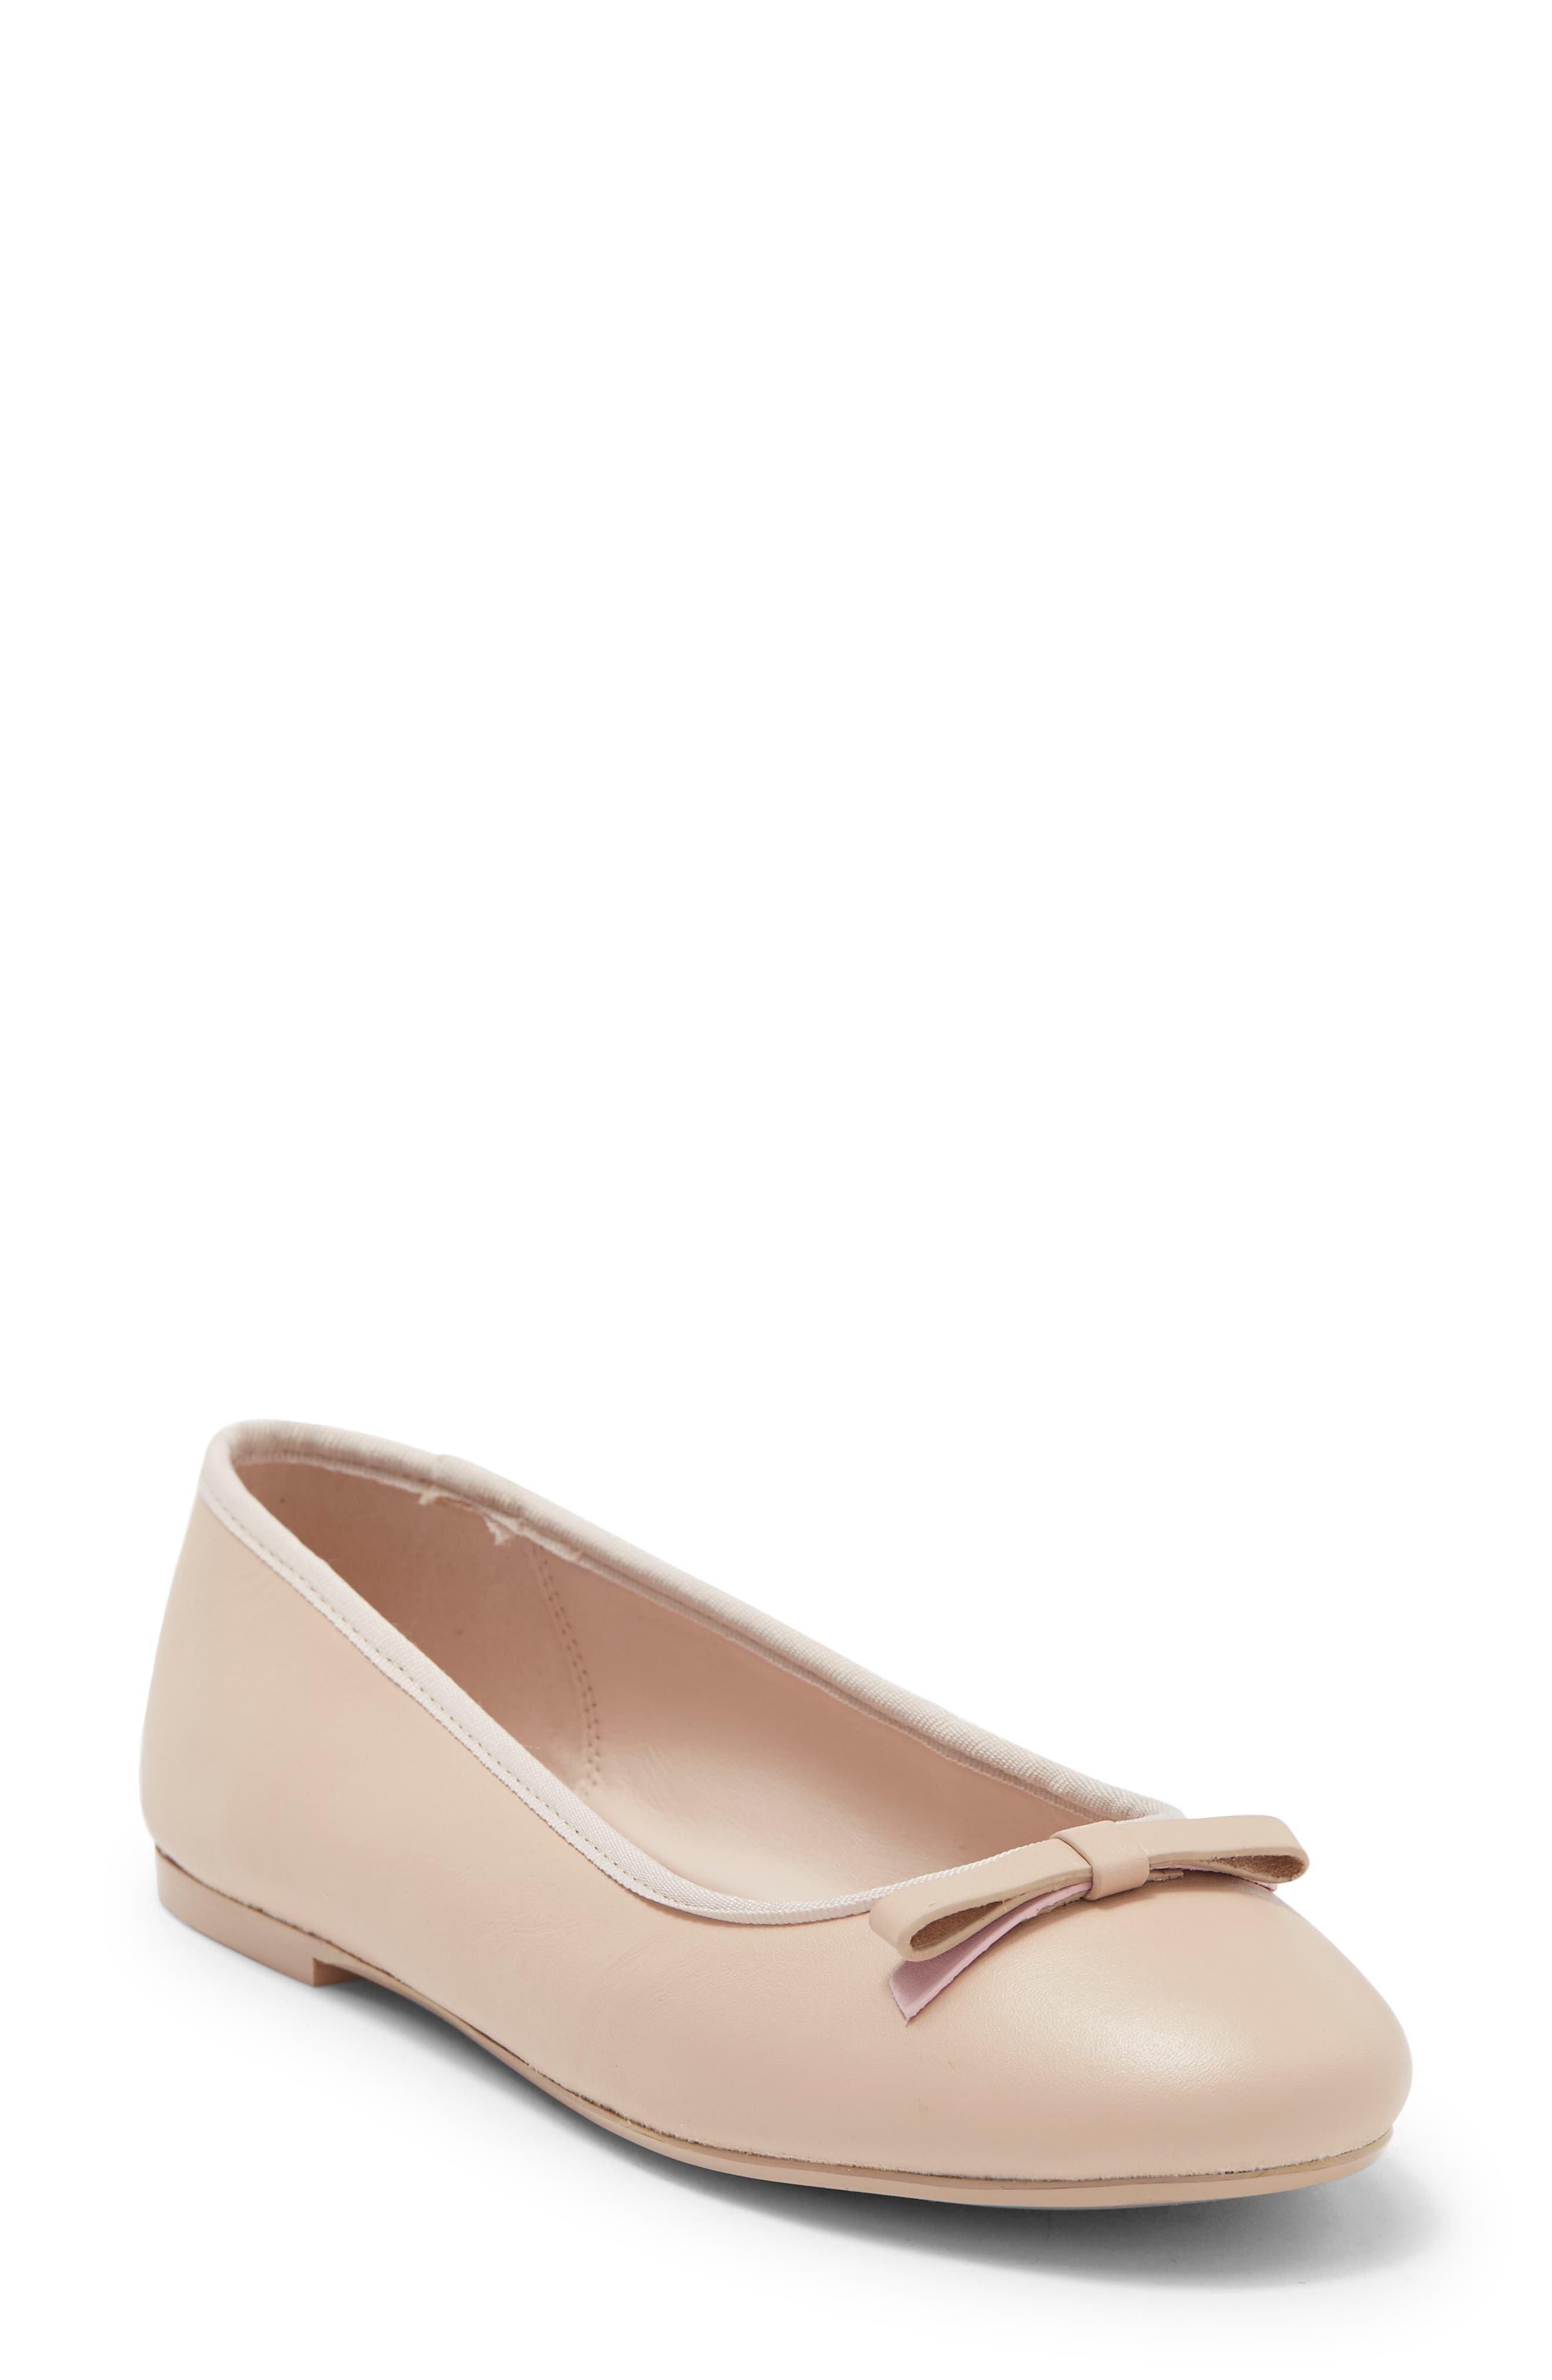 Ted Baker Sualo Ballerina Flat In Nude At Nordstrom Rack in Pink | Lyst